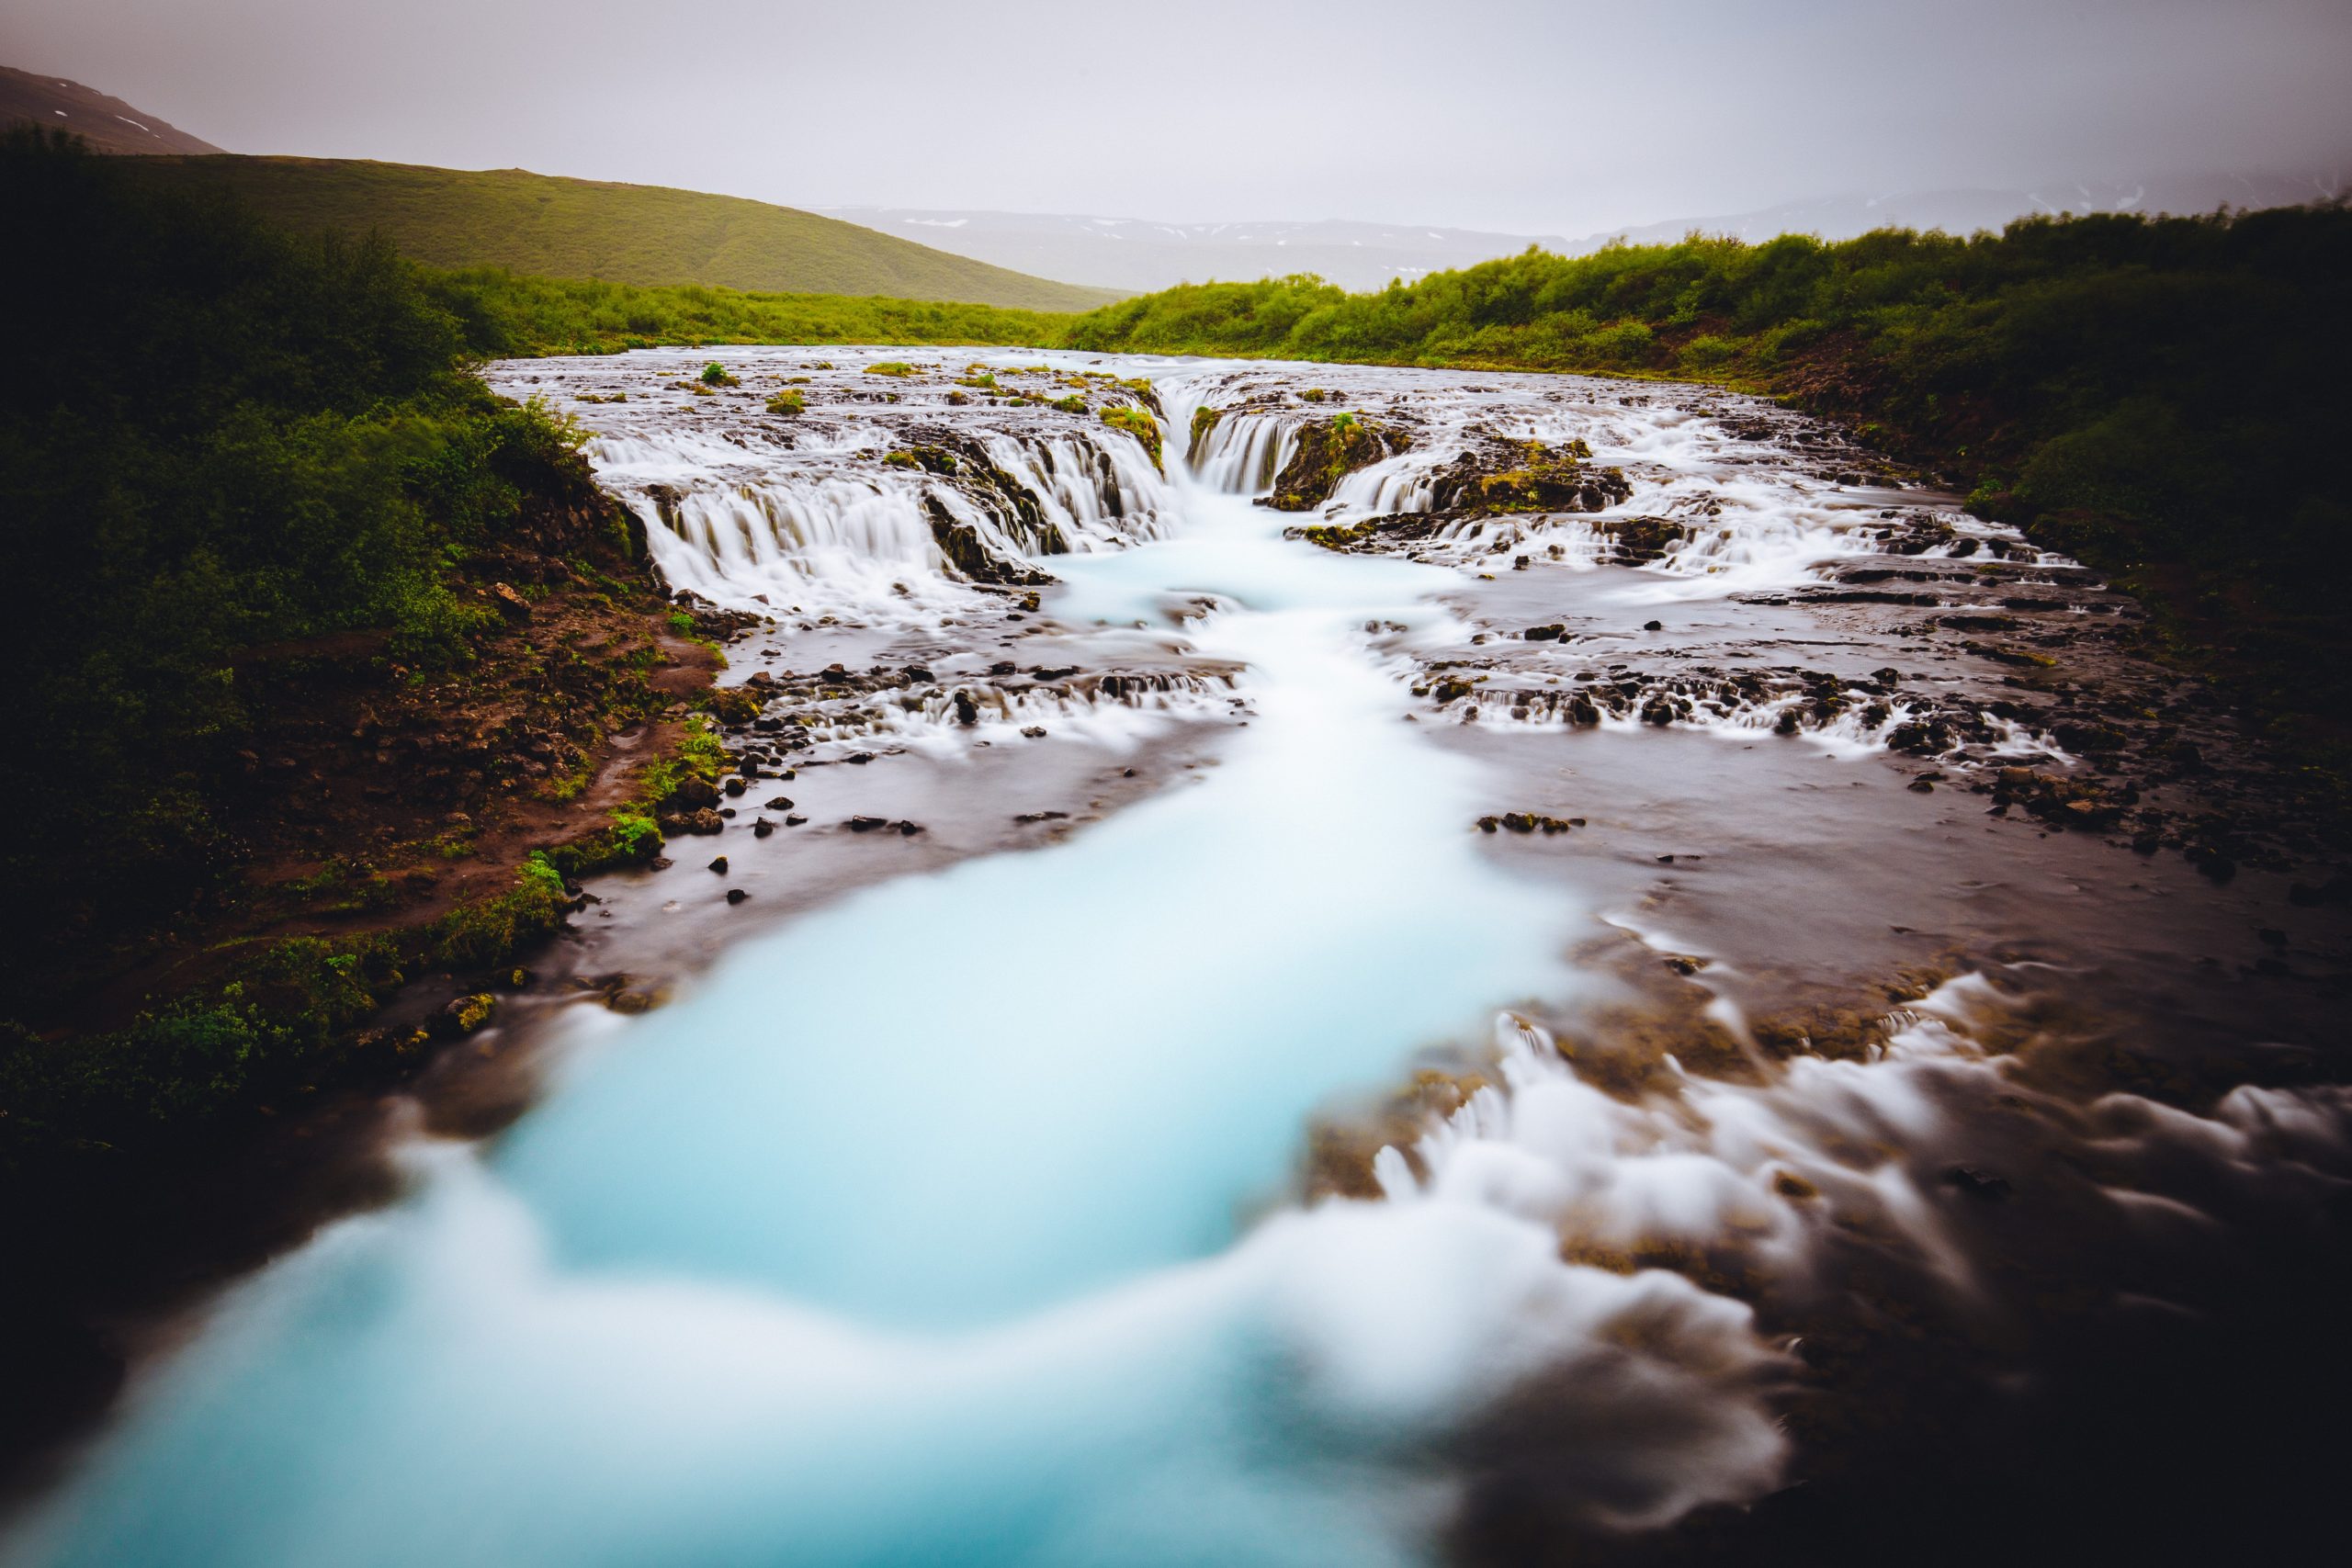 A small waterfall in Iceland